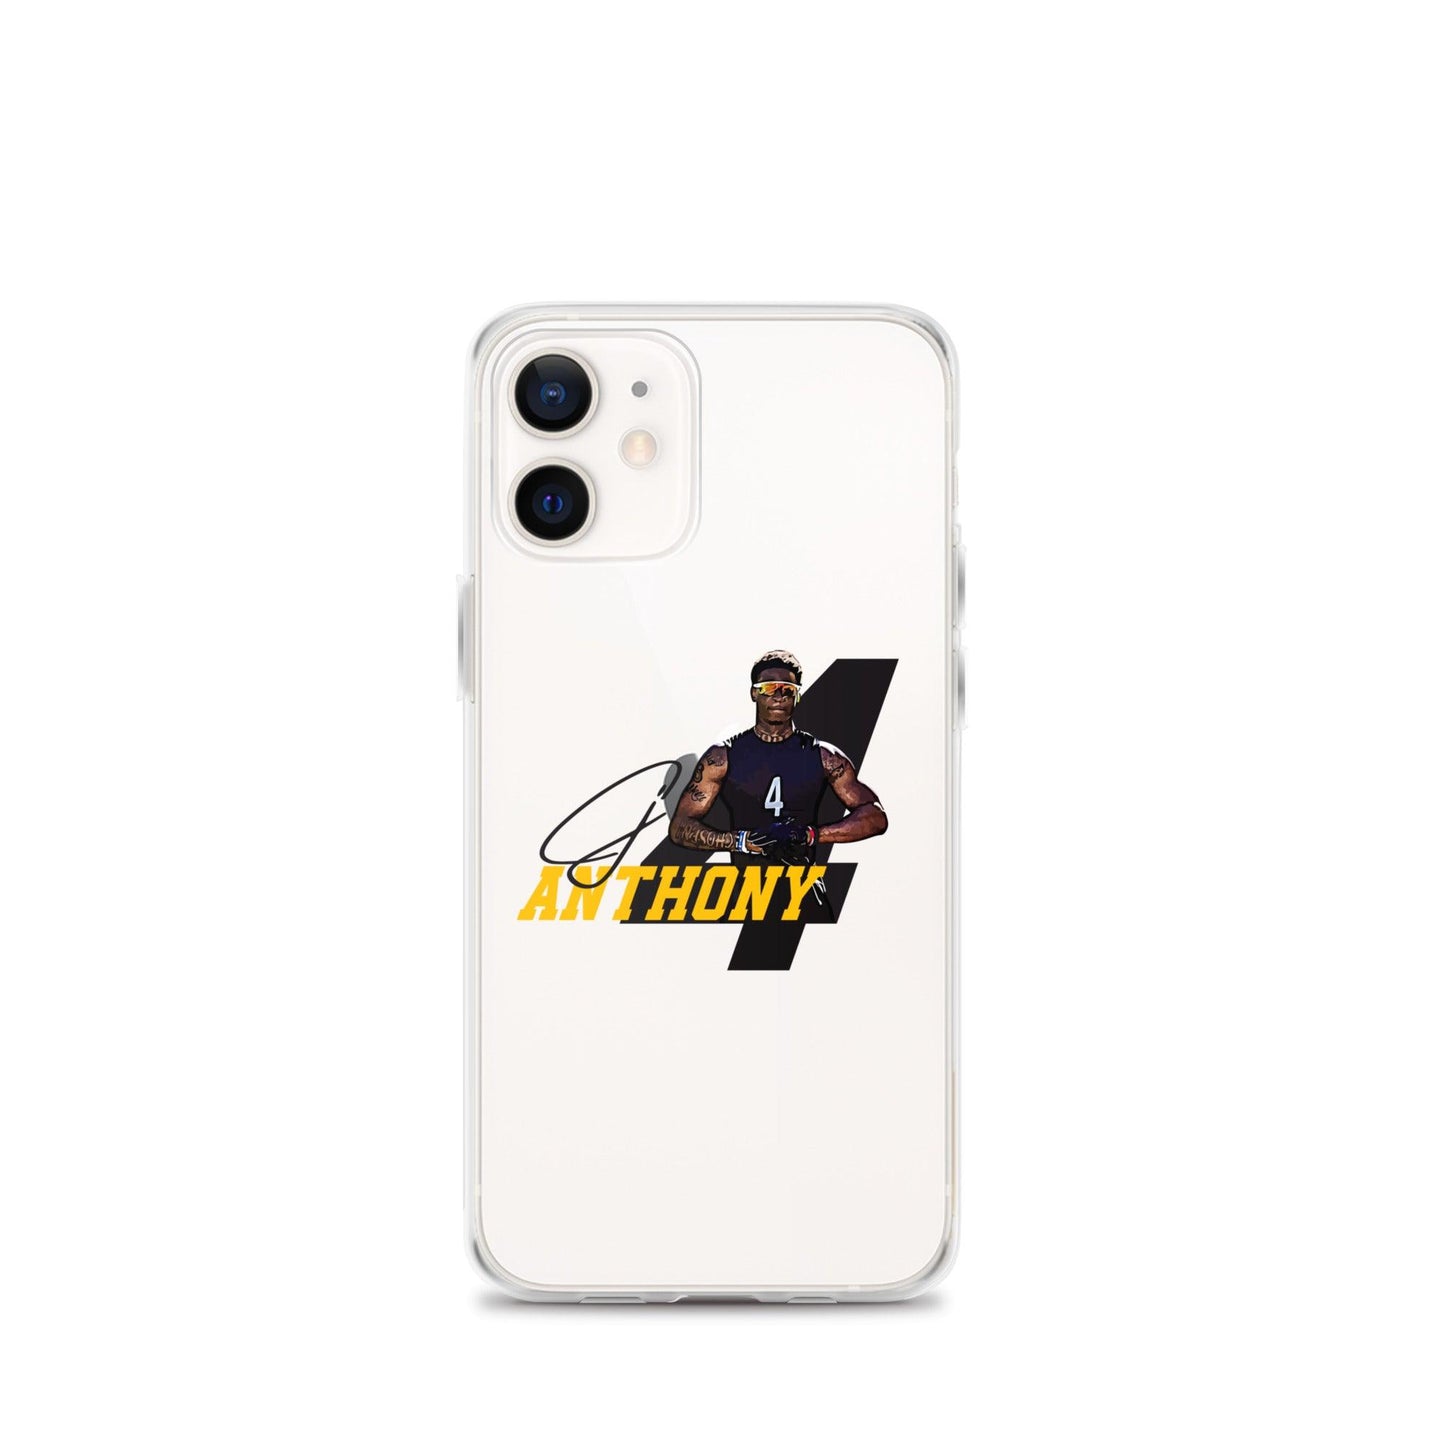 CJ Anthony "Gameday" iPhone Case - Fan Arch